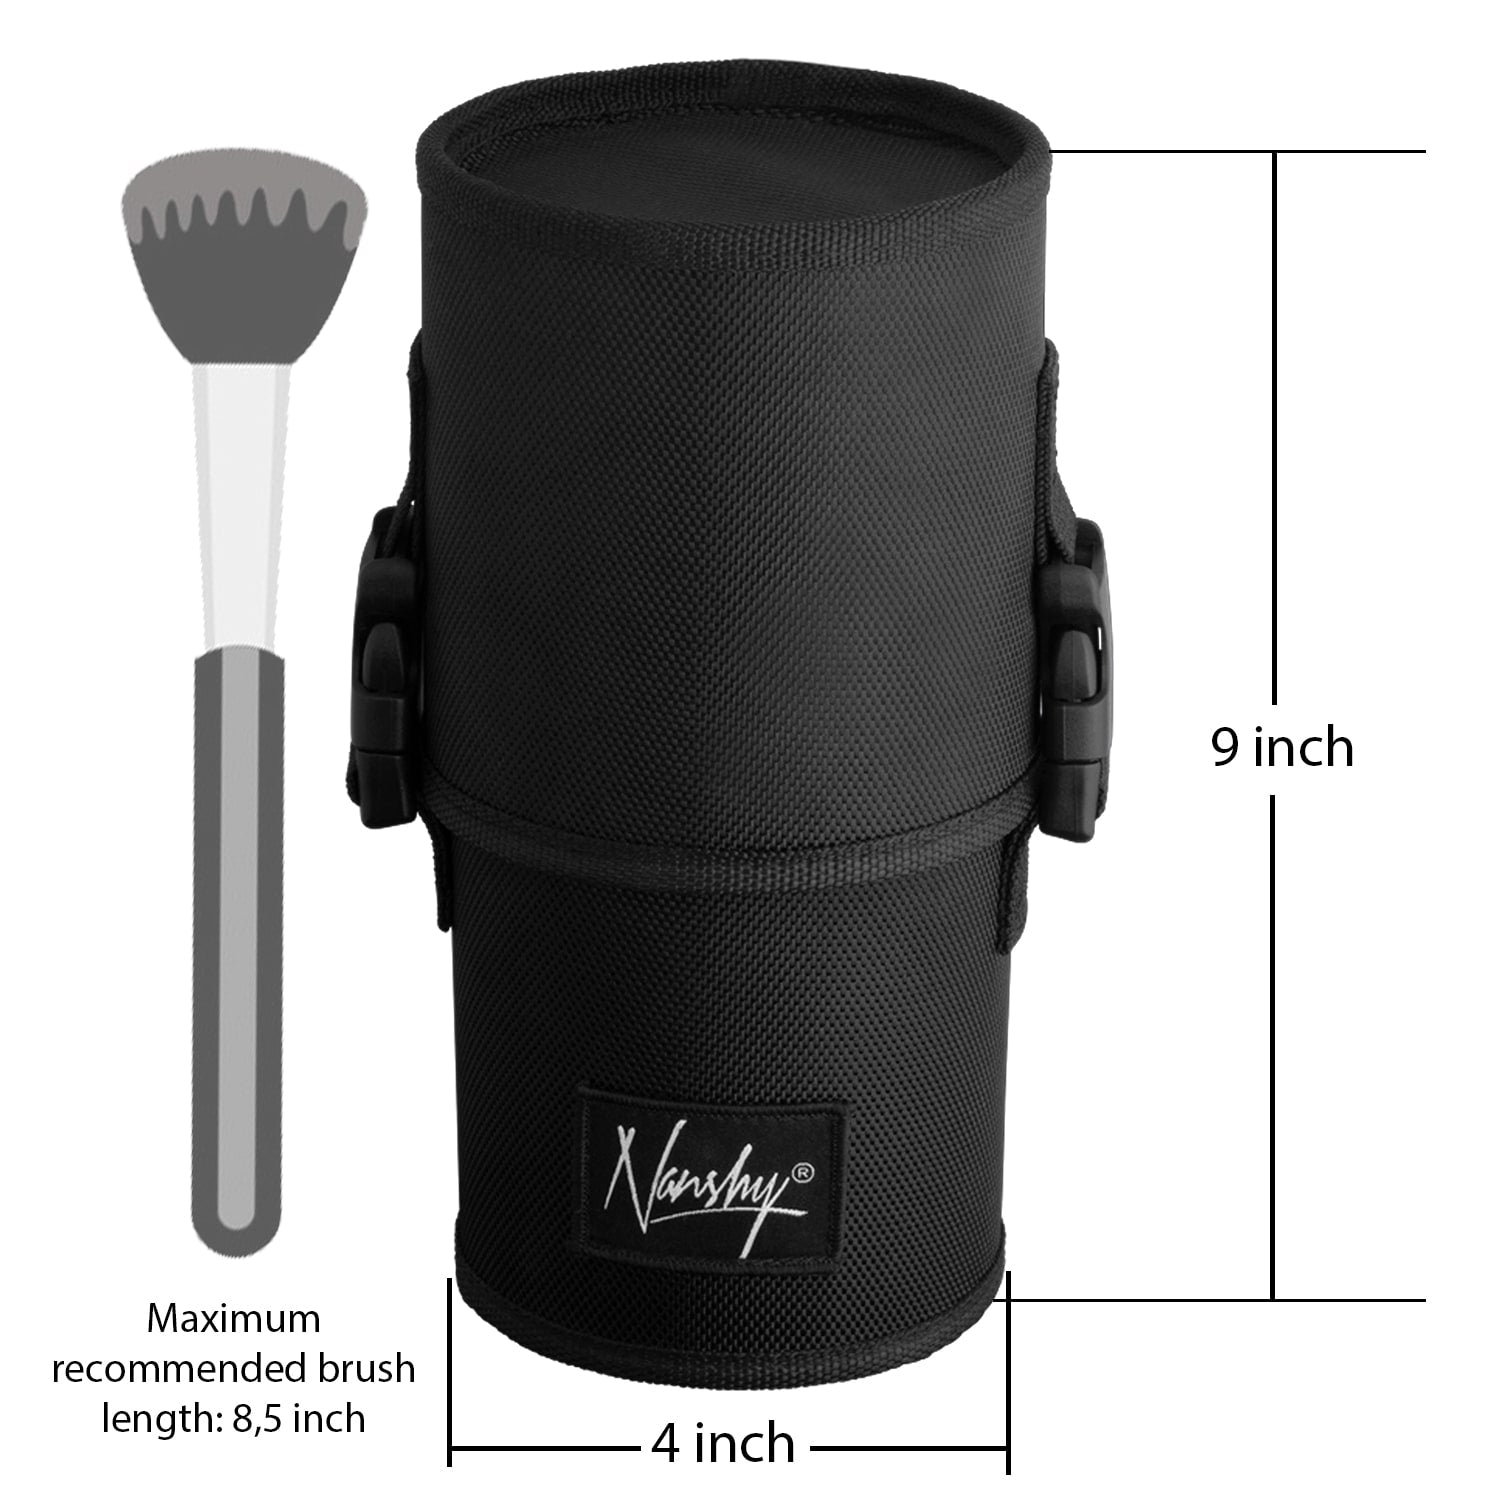 Case for makeup brushes